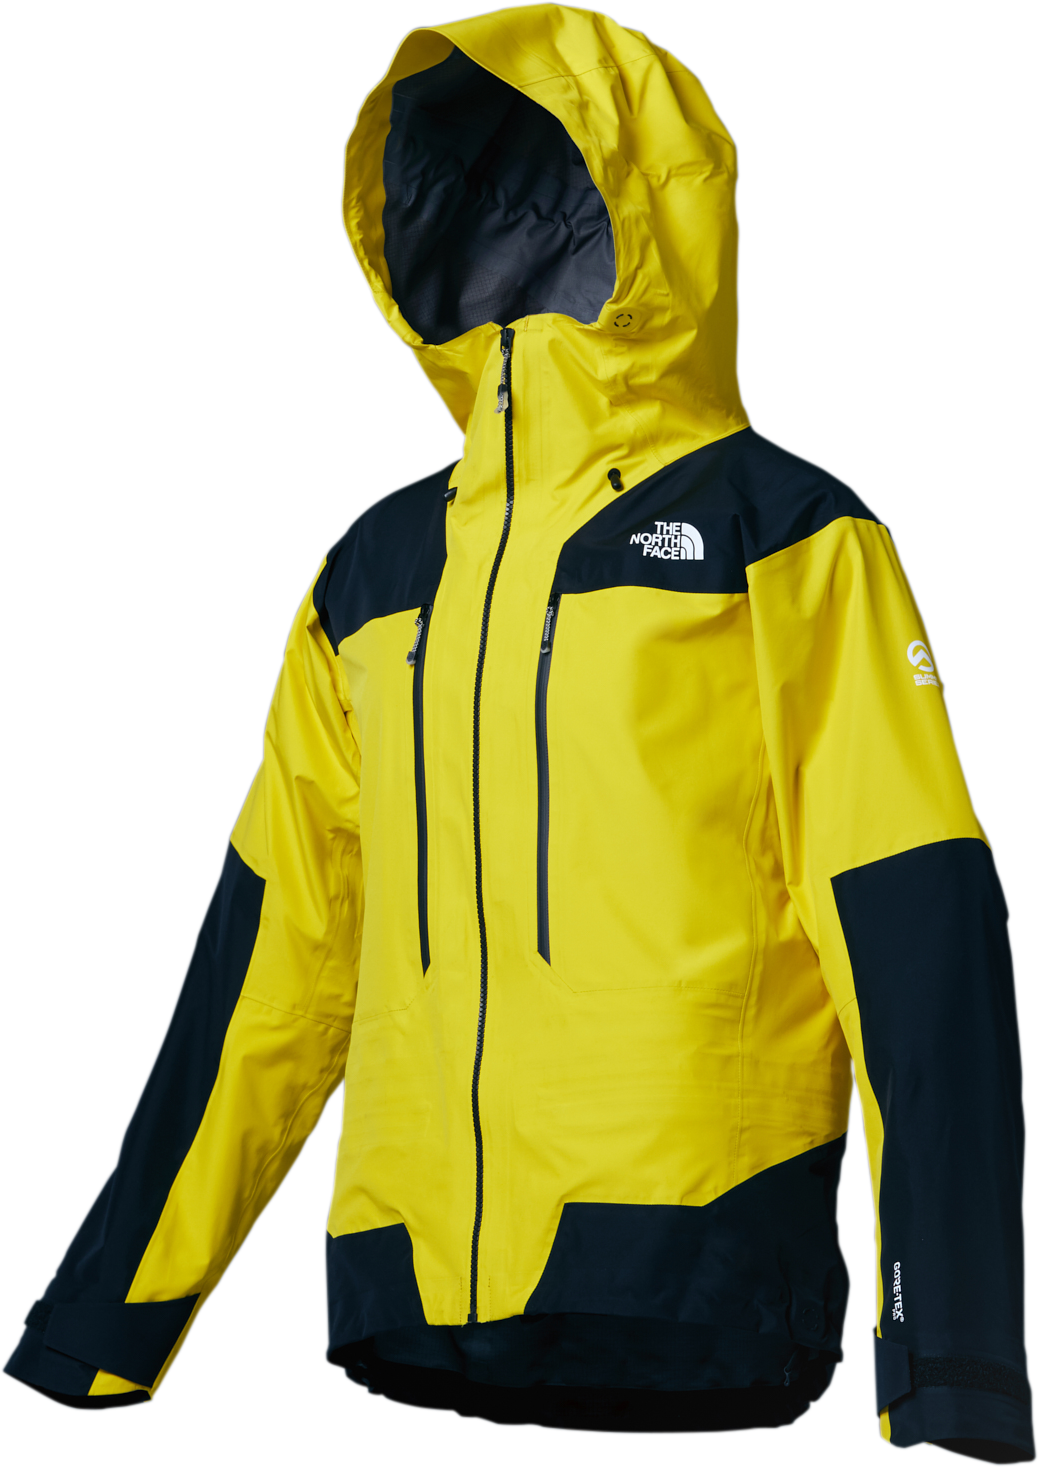 GTX Pro Jacket | THE NORTH FACE